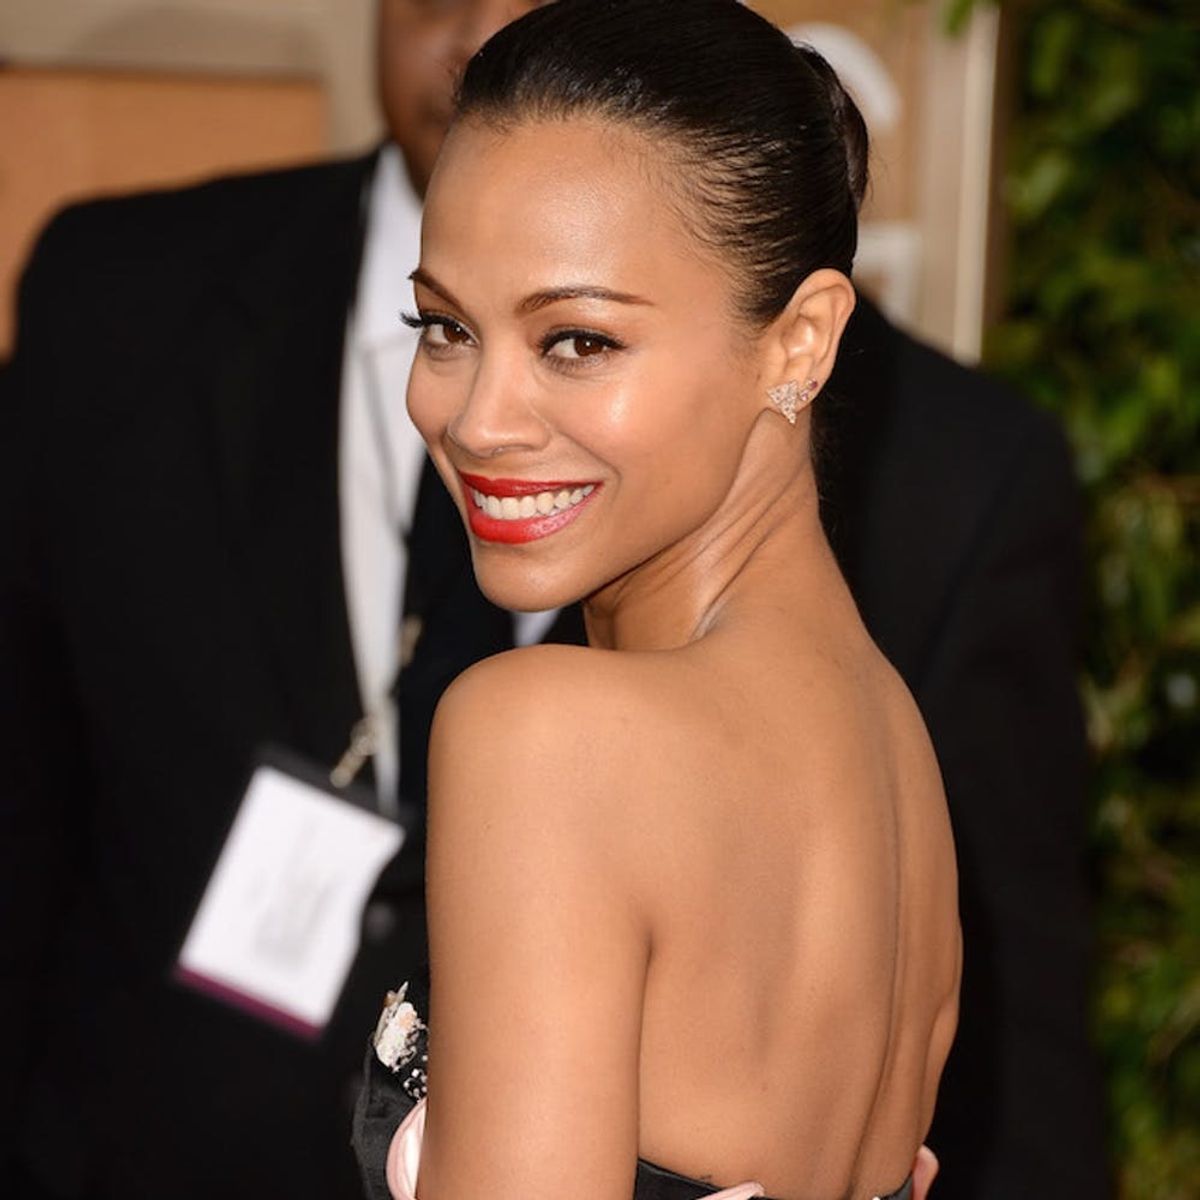 Zoe Saldana’s Workout Selfie Is Starting a Movement With Moms